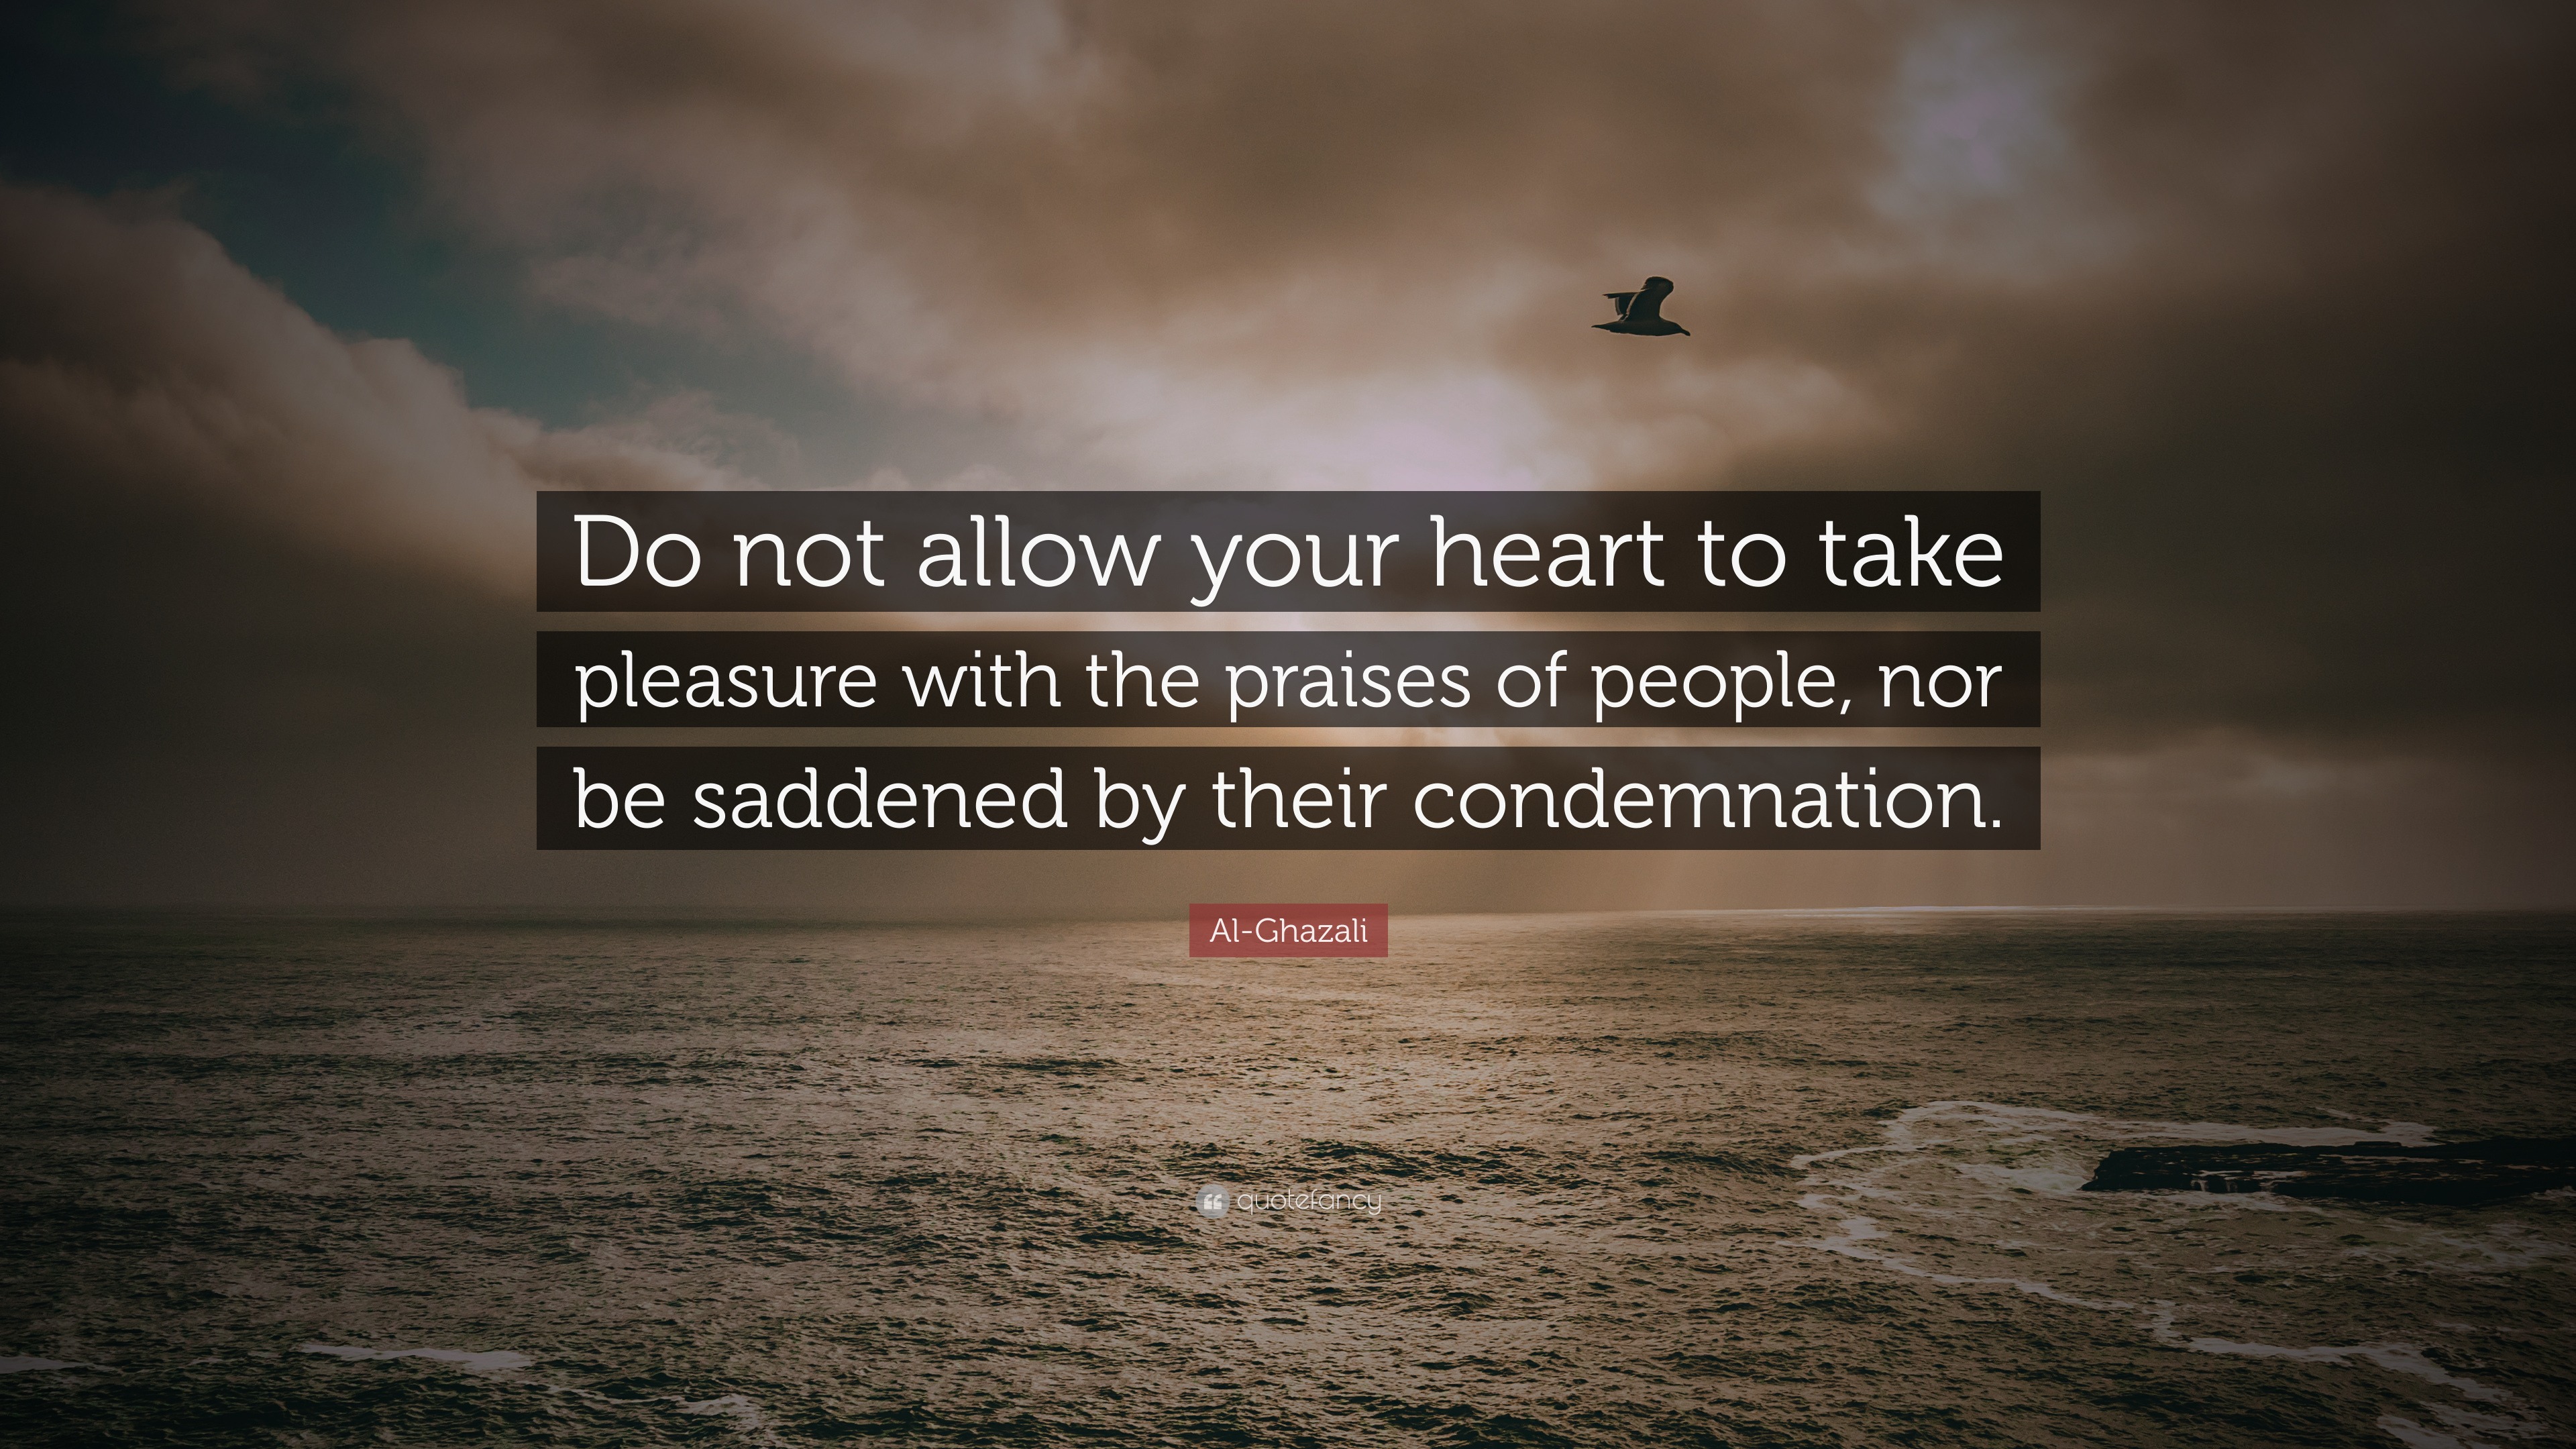 Al-Ghazali Quote: “Do not allow your heart to take pleasure with the